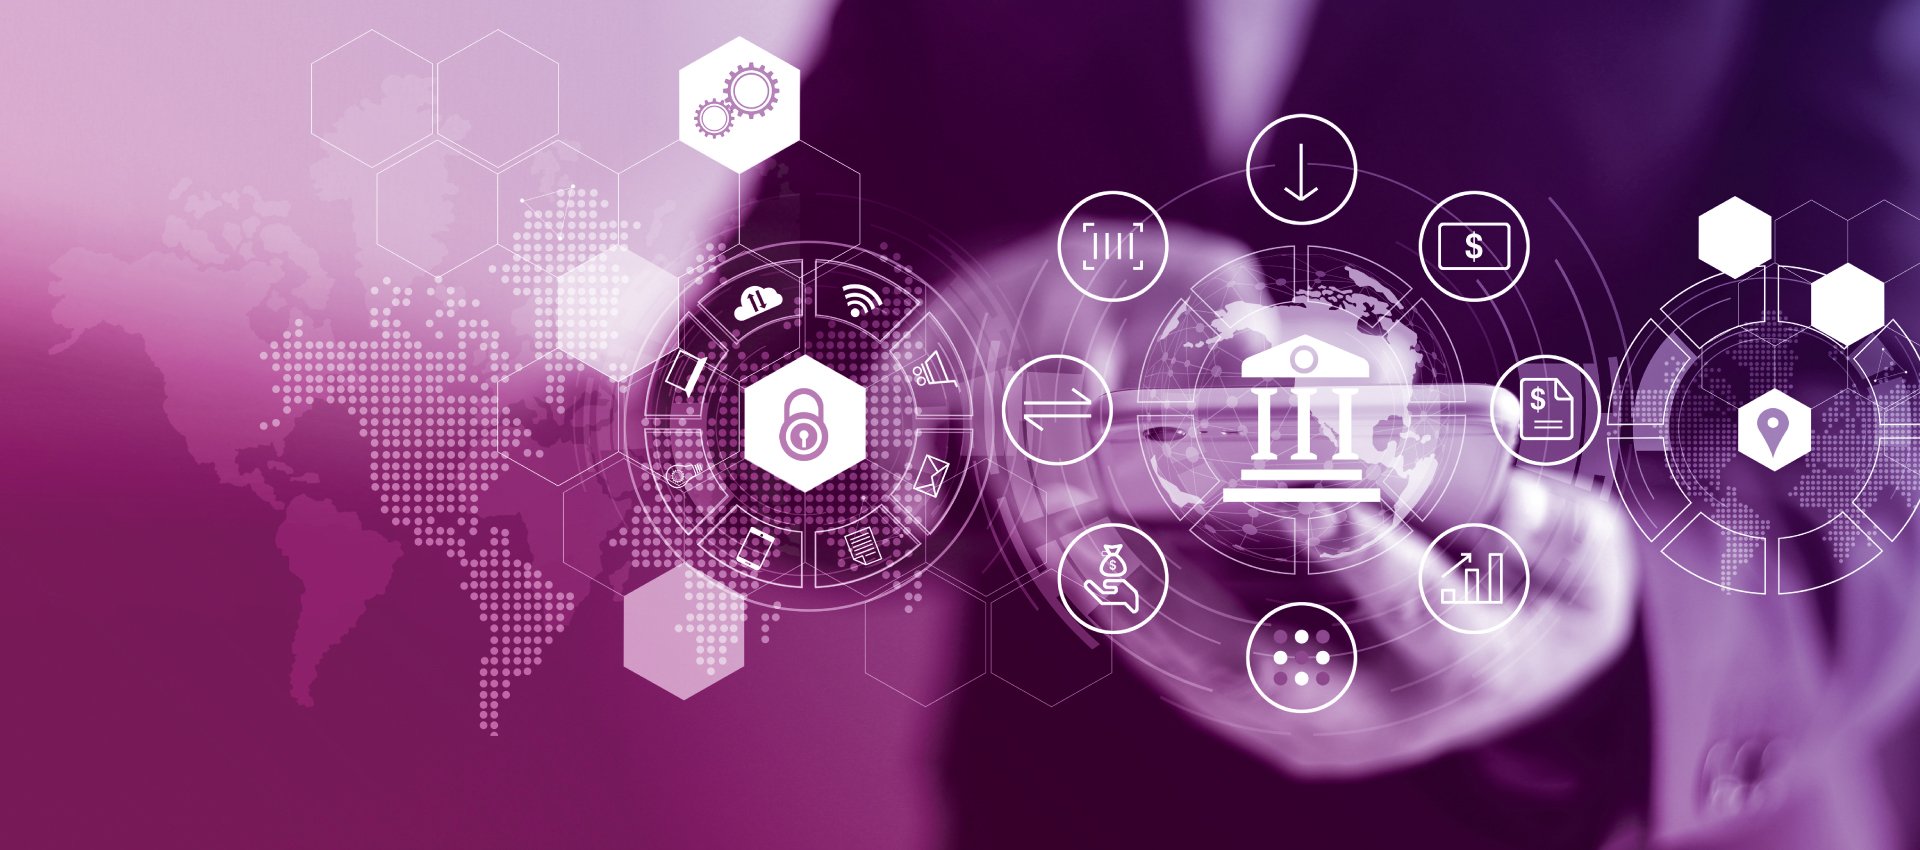 Securing the Digital Banking Ecosystem with API Security & Governance